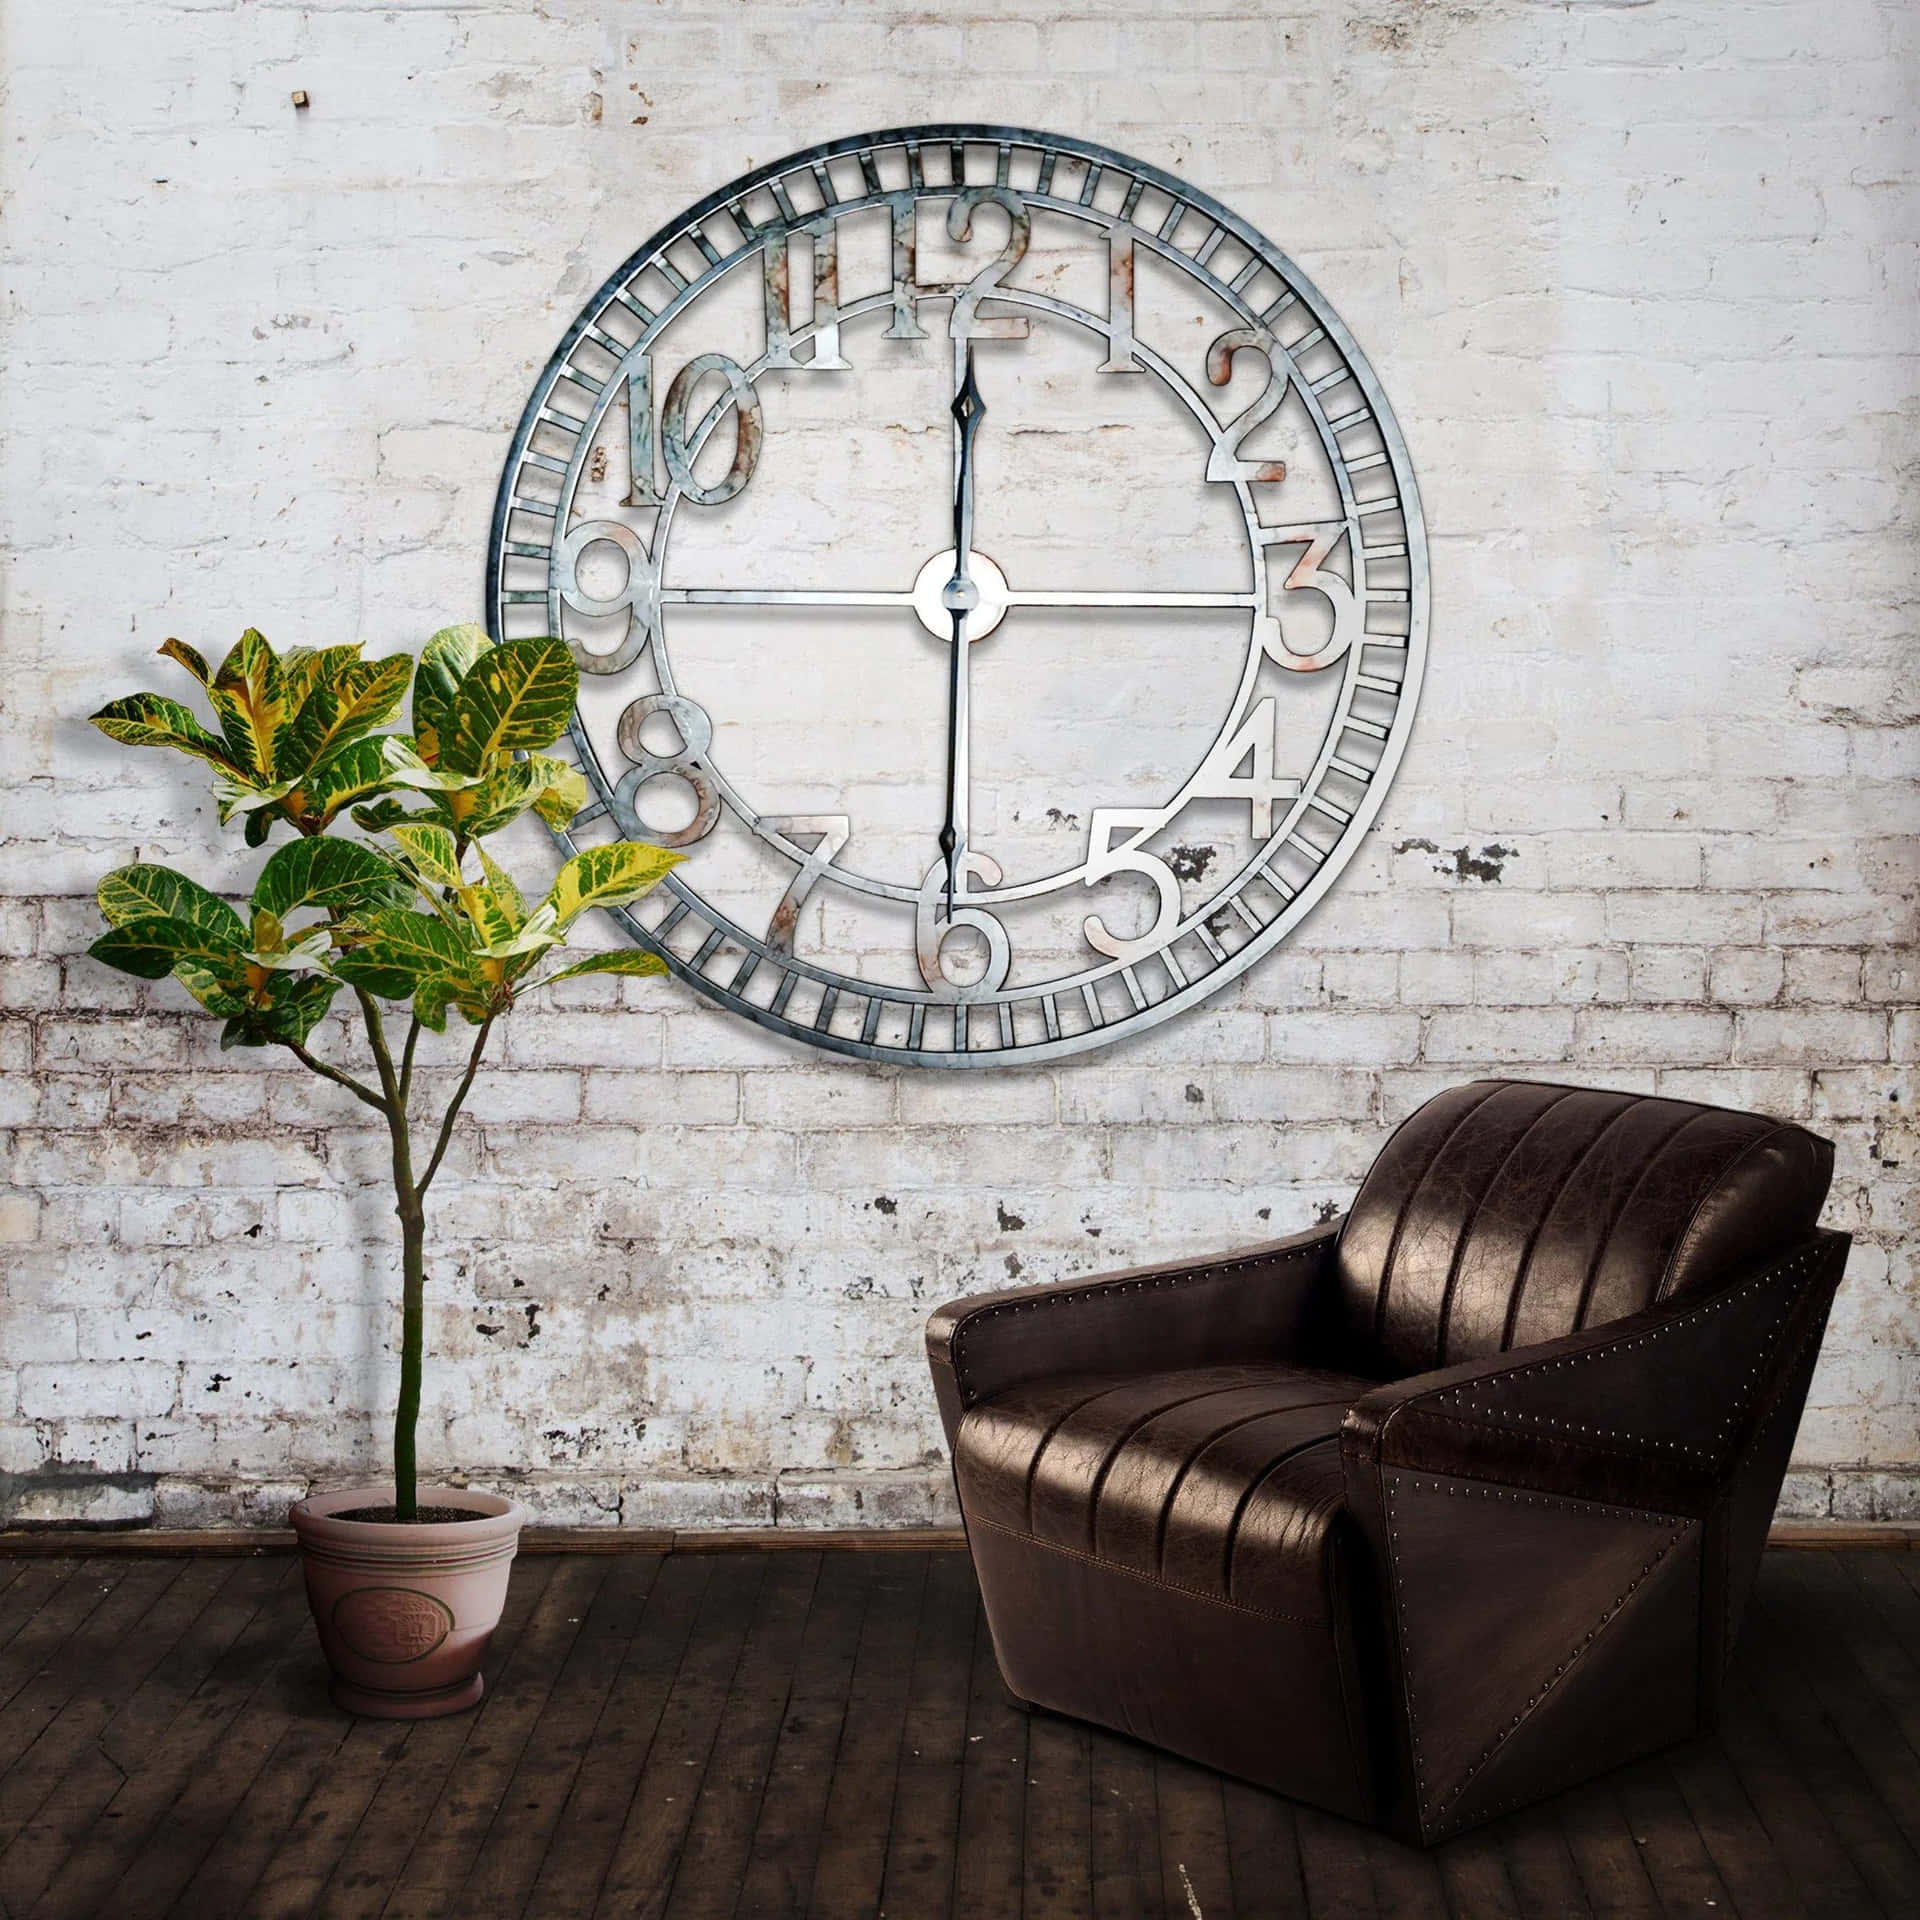 Keep time with this beautiful wall clock.